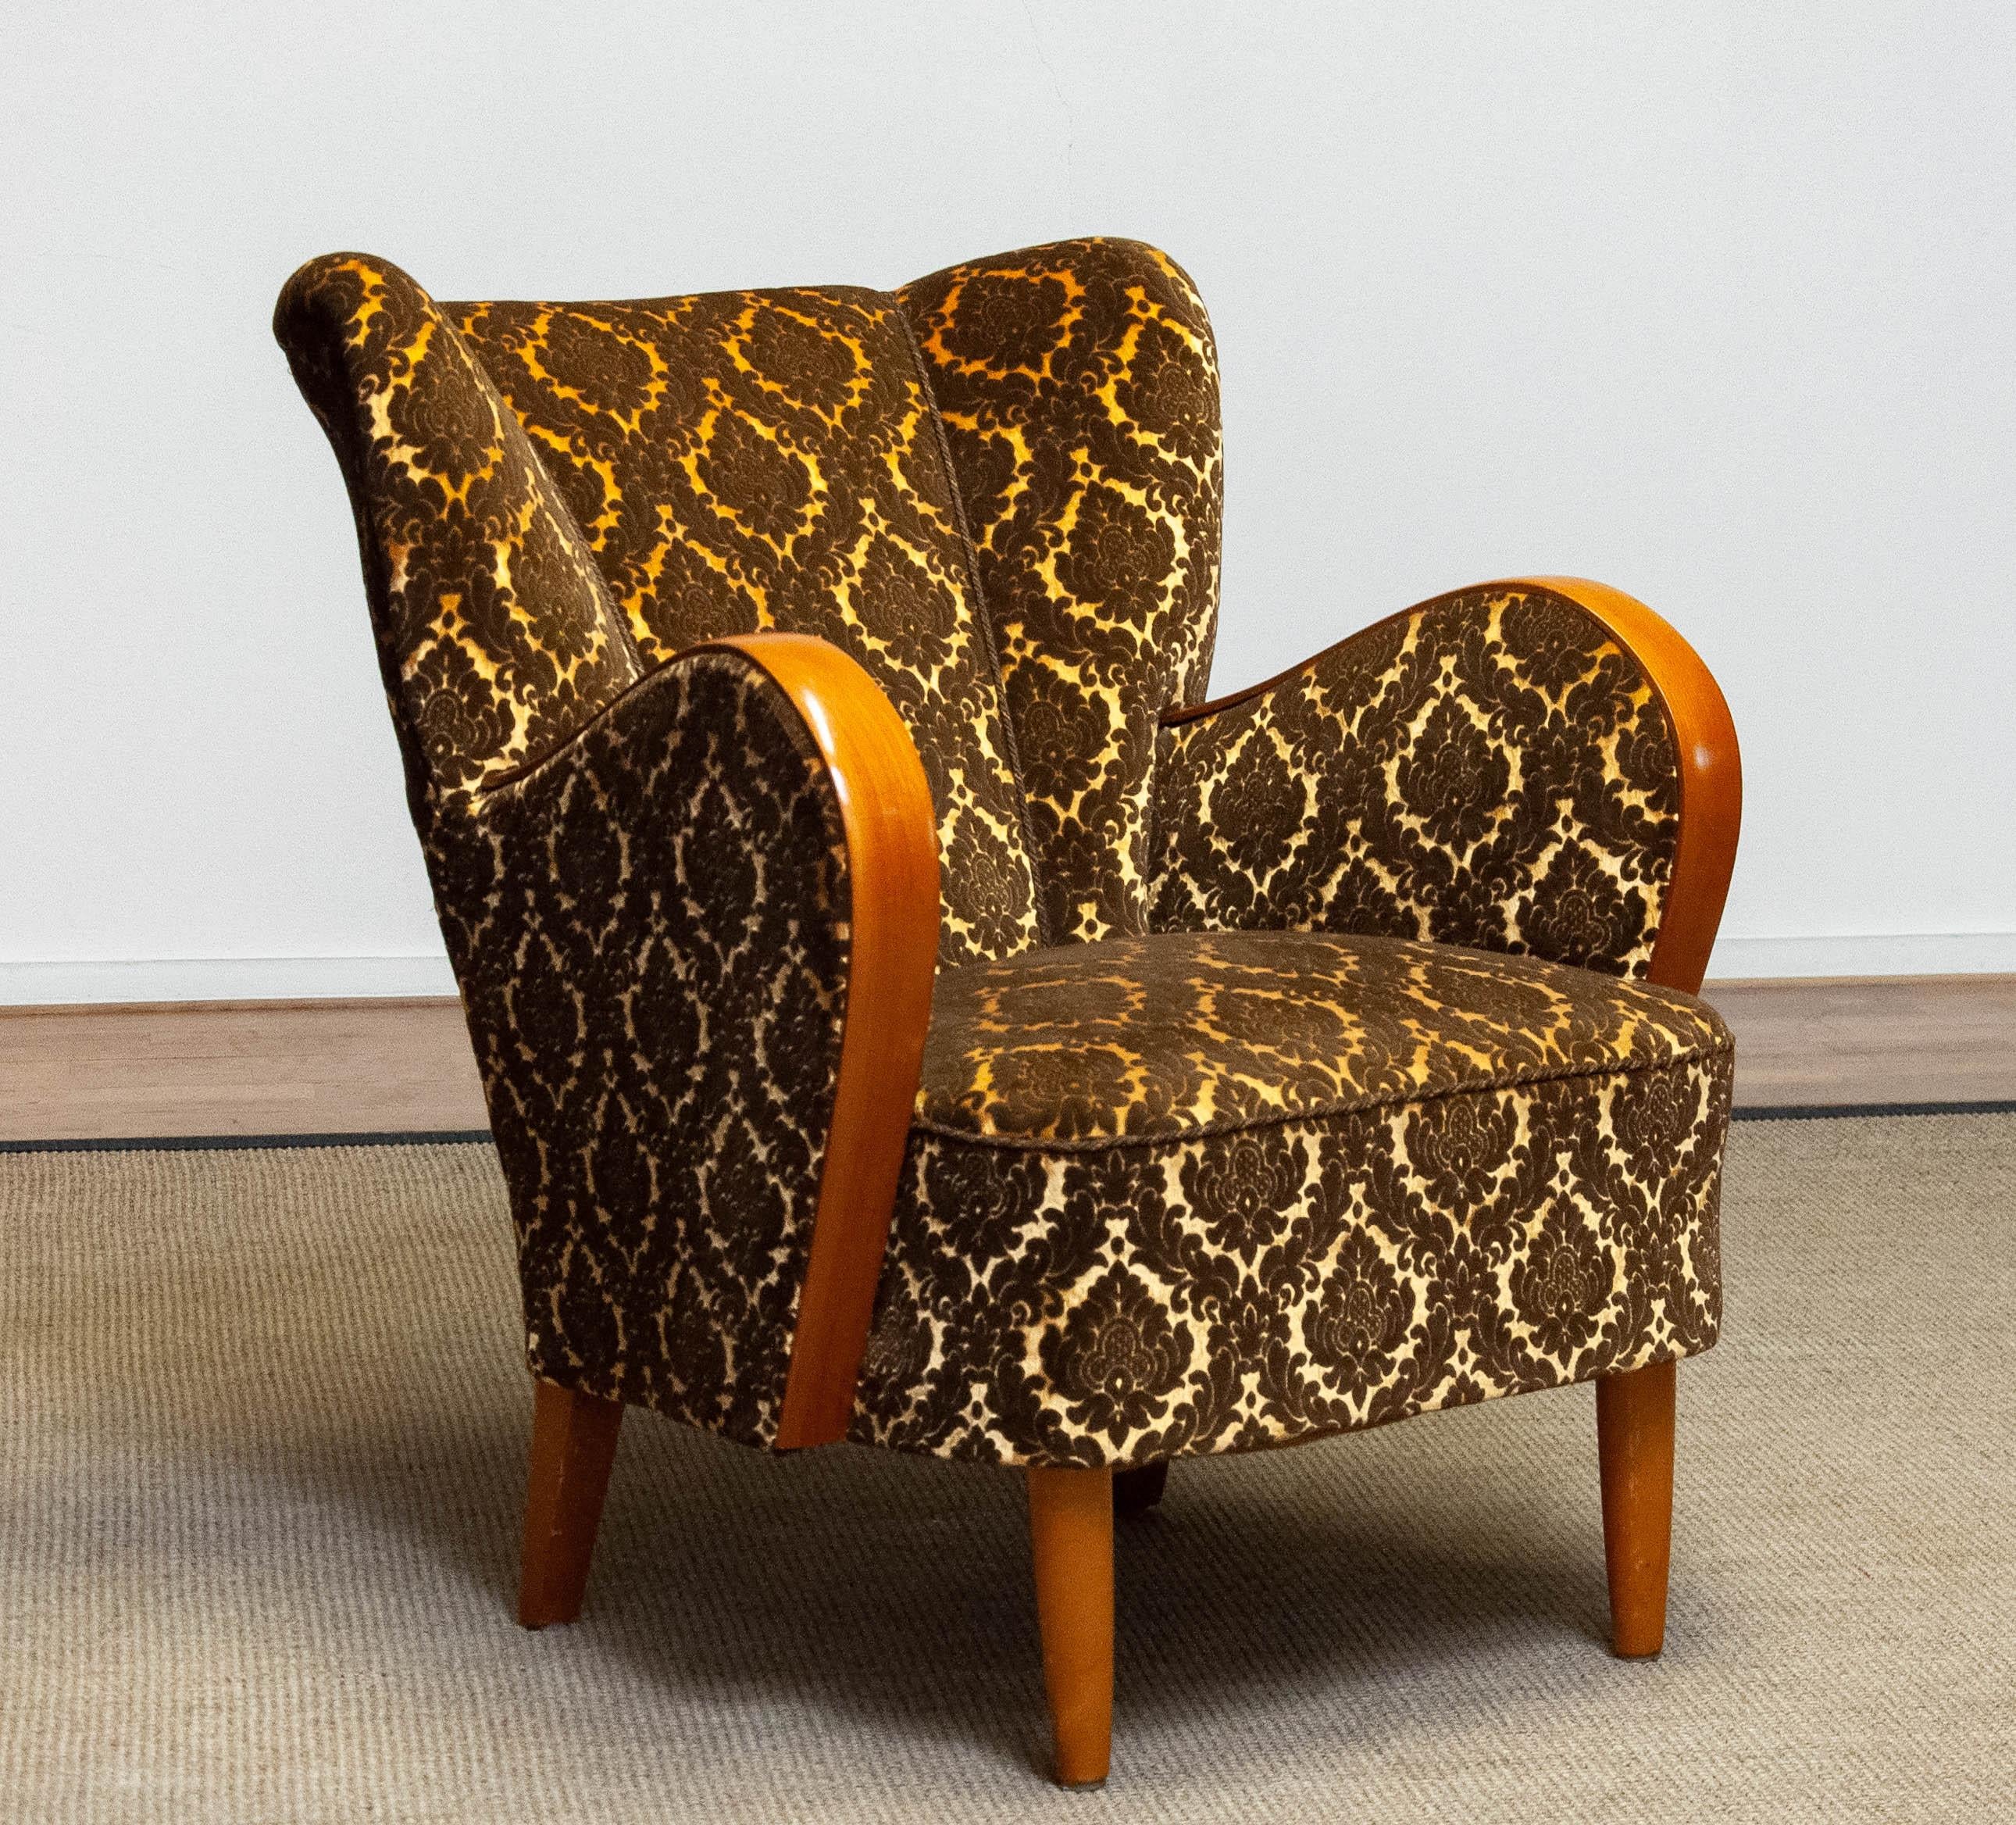 Absolutely beautiful and complete original Scandinavian lounge / club chair in the style of Fritz Hansen made in Danmark.
This lounge / club chair is upholstered with gold and brown mixed jacquard velvet fabric. The bentwood armrests are made of